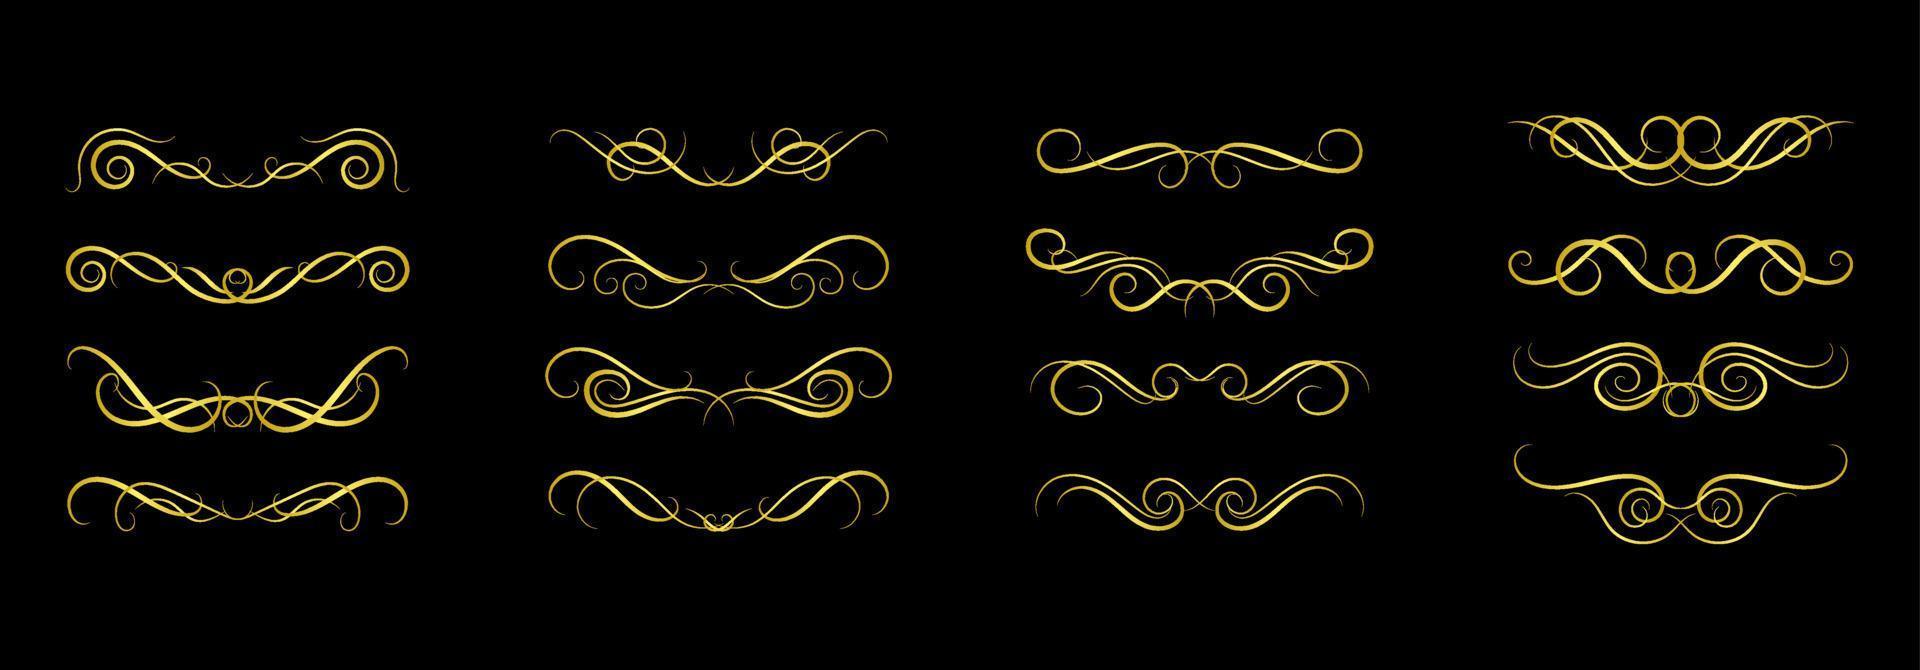 Gold Borders Elements Set Collection, ornament Vector